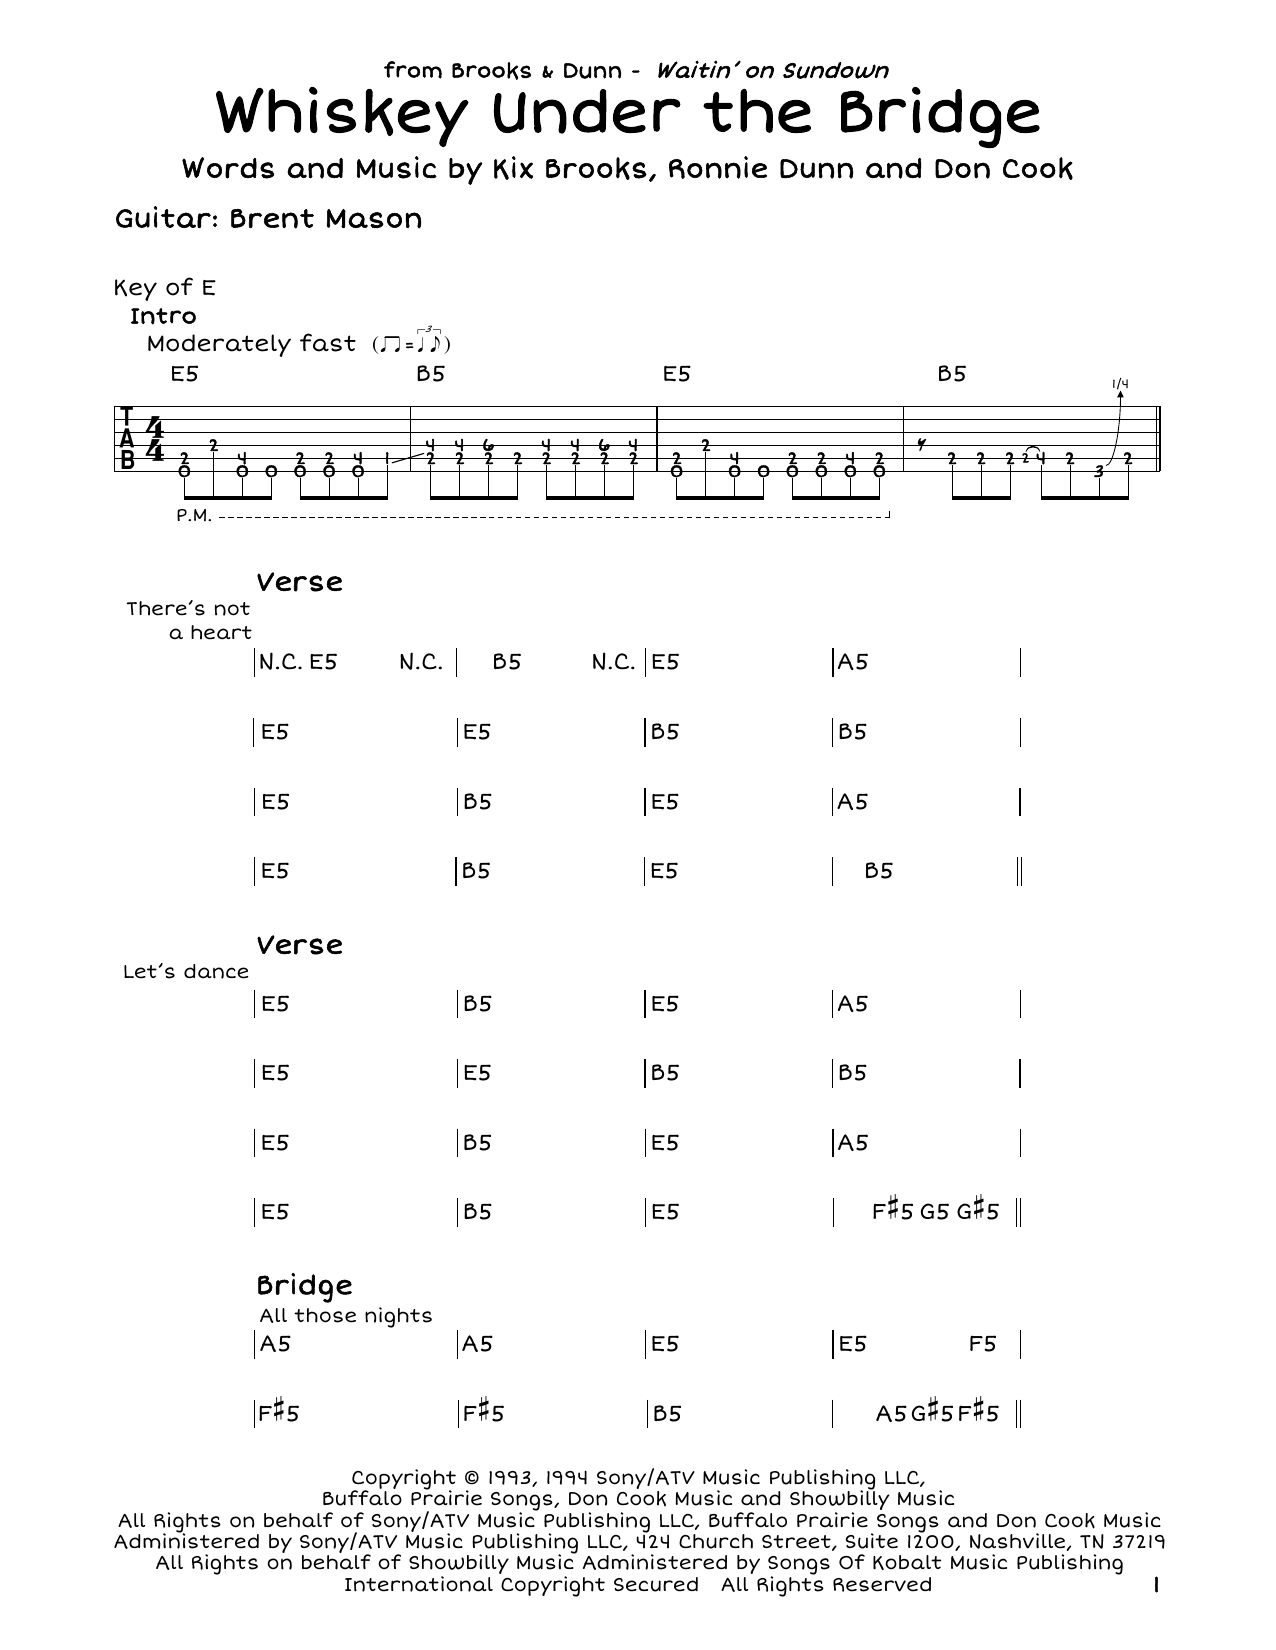 Brooks & Dunn Whiskey Under The Bridge sheet music notes and chords. Download Printable PDF.